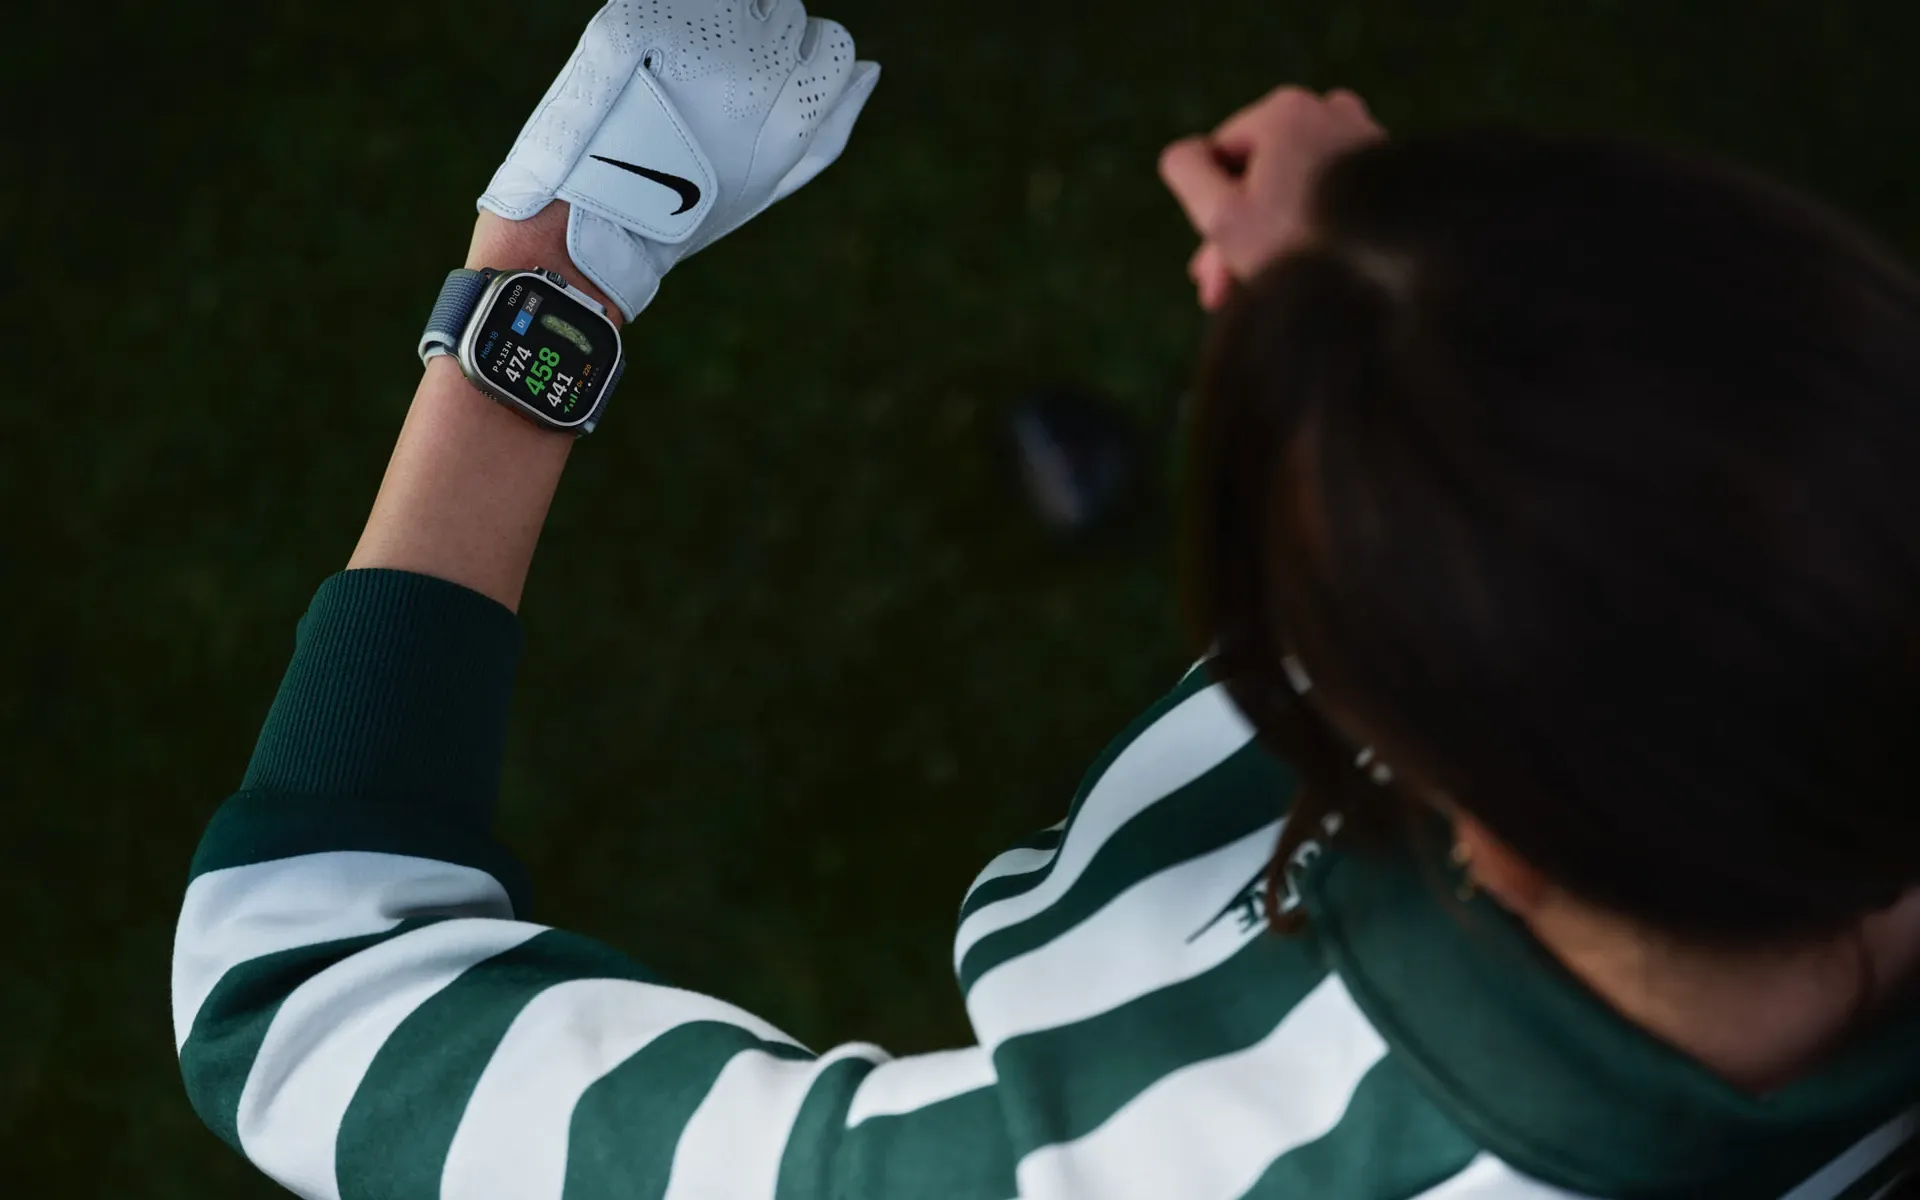 Apple Watch gains new features designed for Golfers